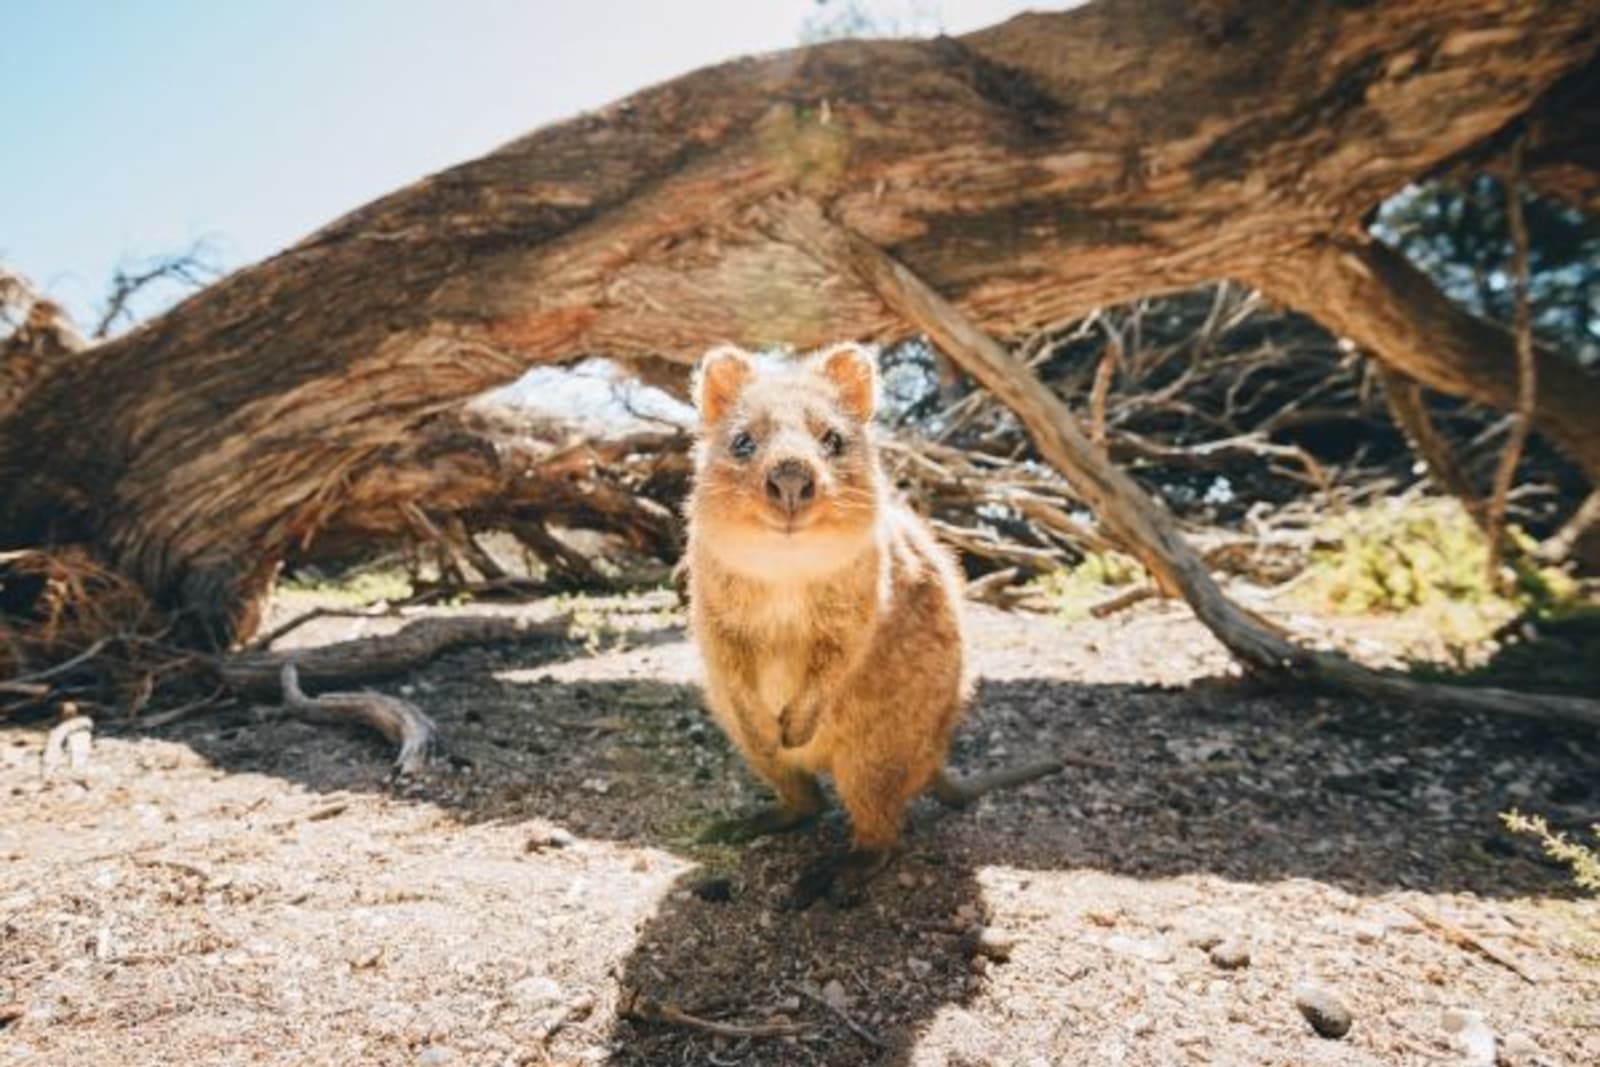 Quokka in front of an old knock down tree